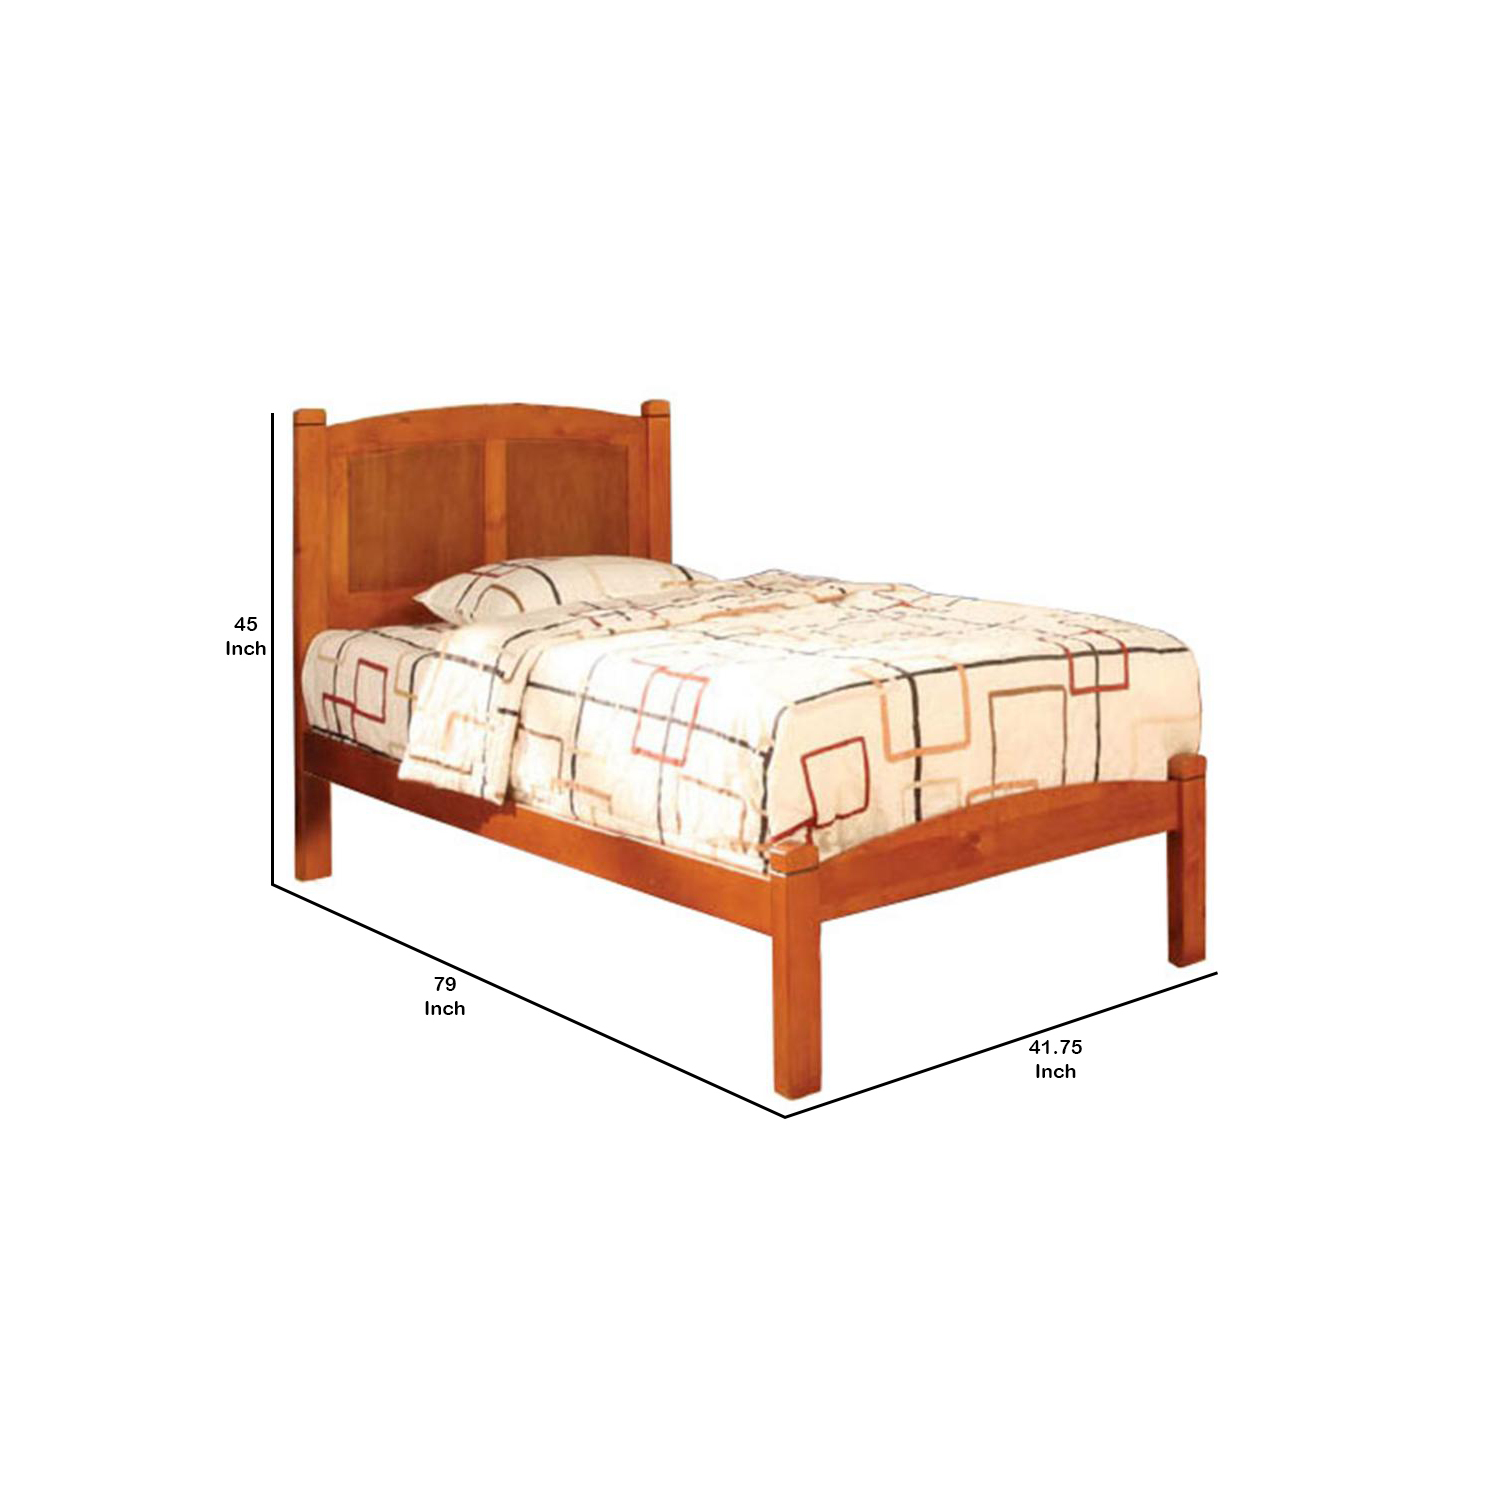 Benjara Wooden Twin Bed with Panelled Headboard and Footboard, Brown - image 4 of 6